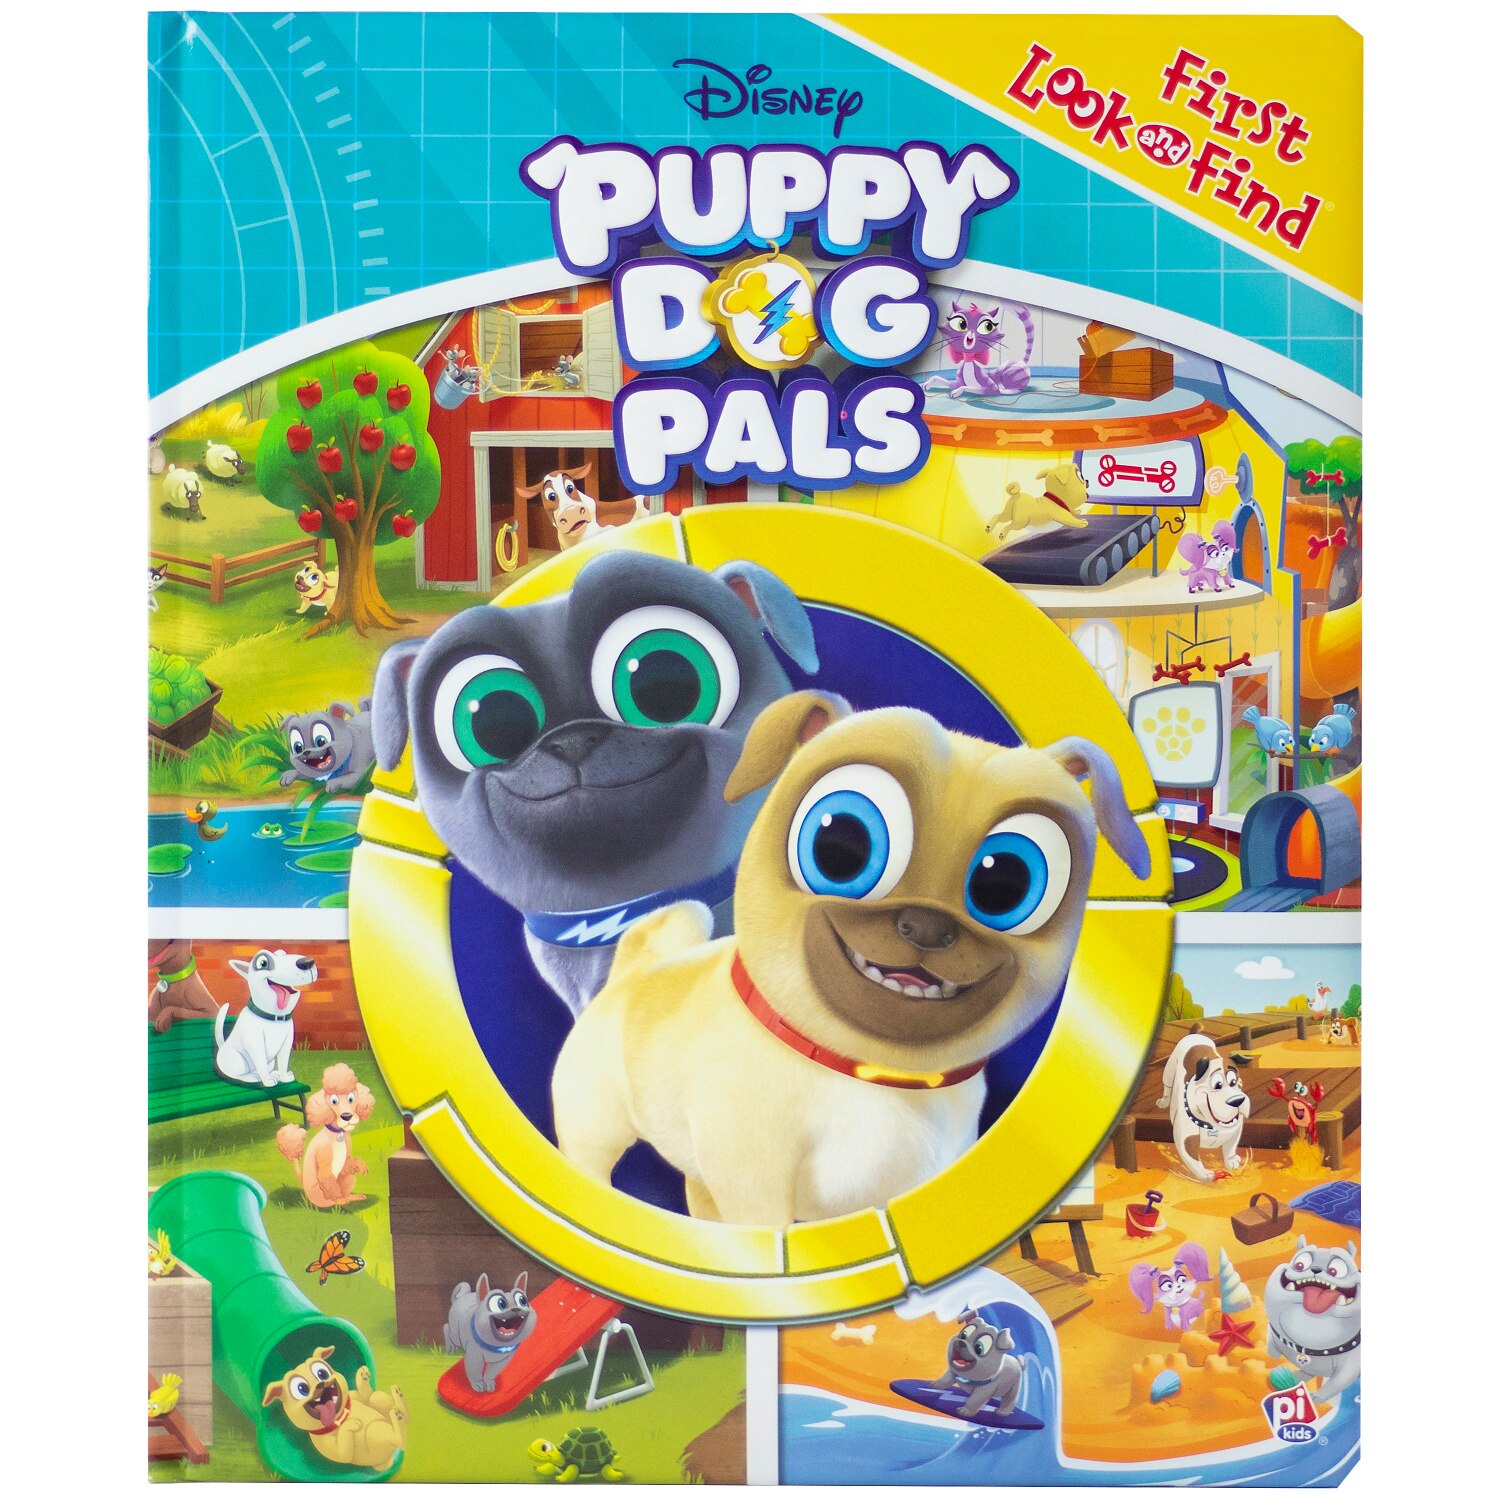 Disney Puppy Dog Pals First Look and Find Activity Book